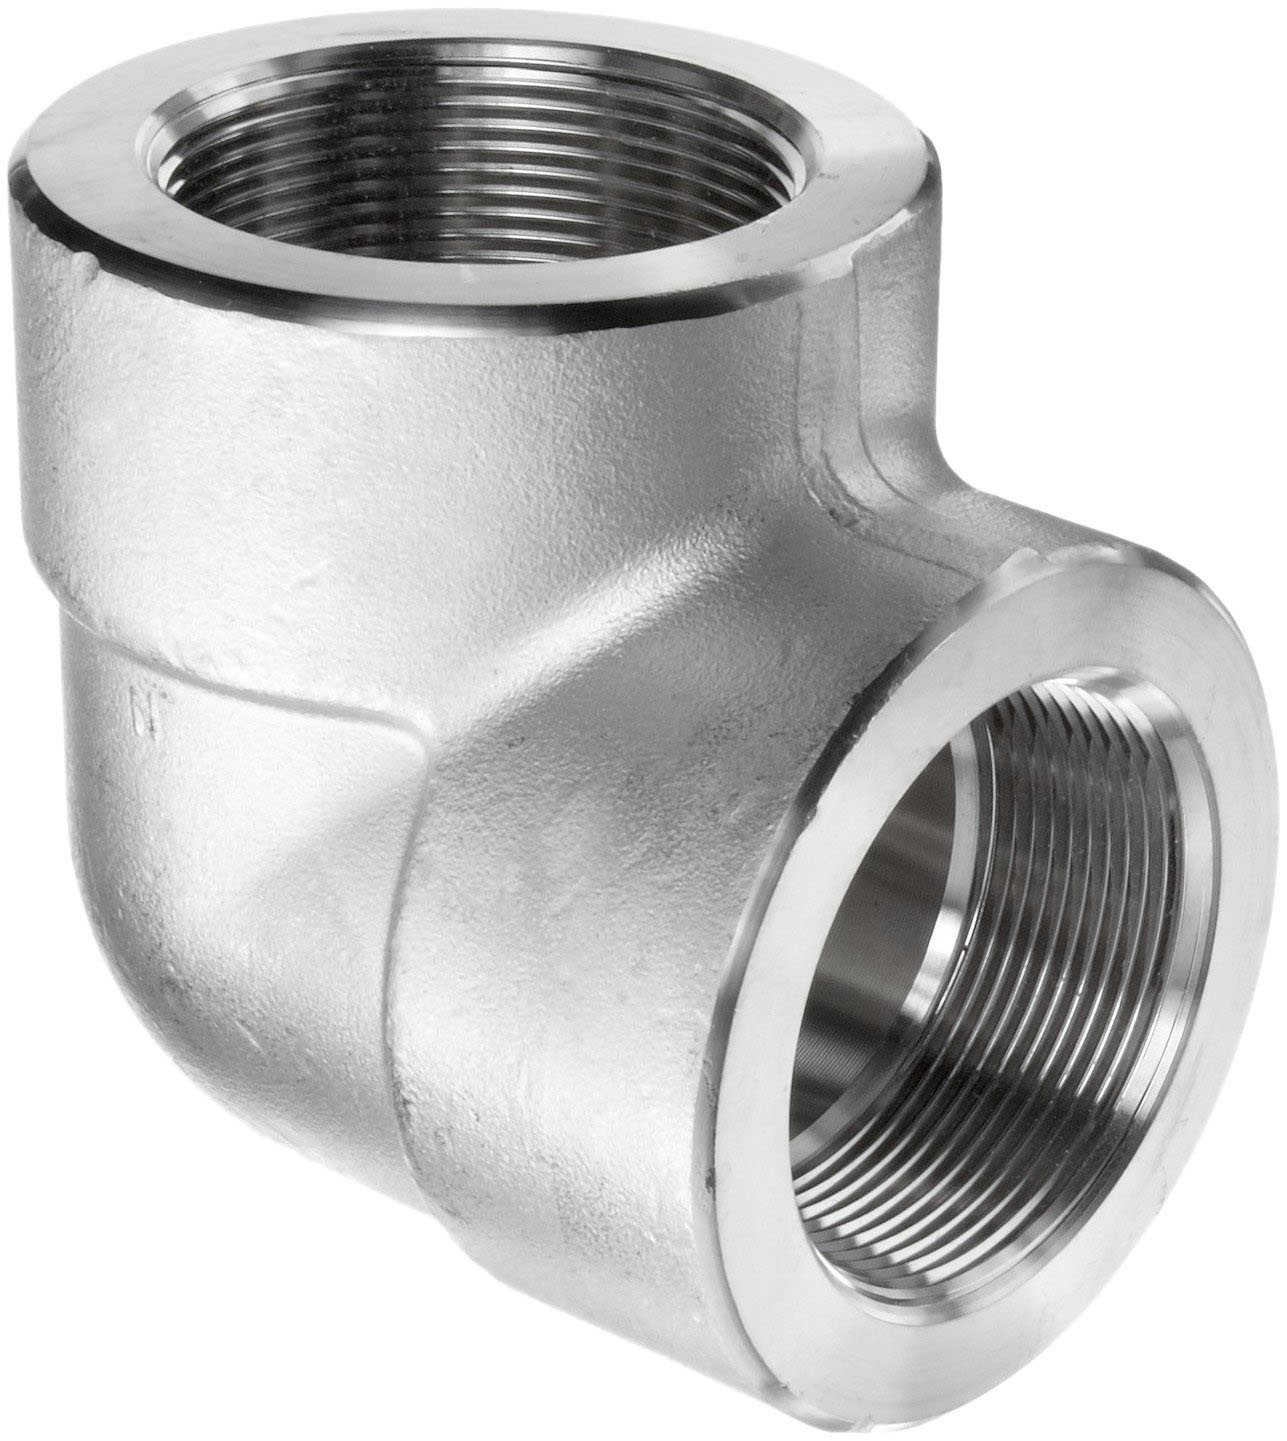 ASME B16.11 Alloy 20 B462 Forged Pipe Fitting Manufacturer